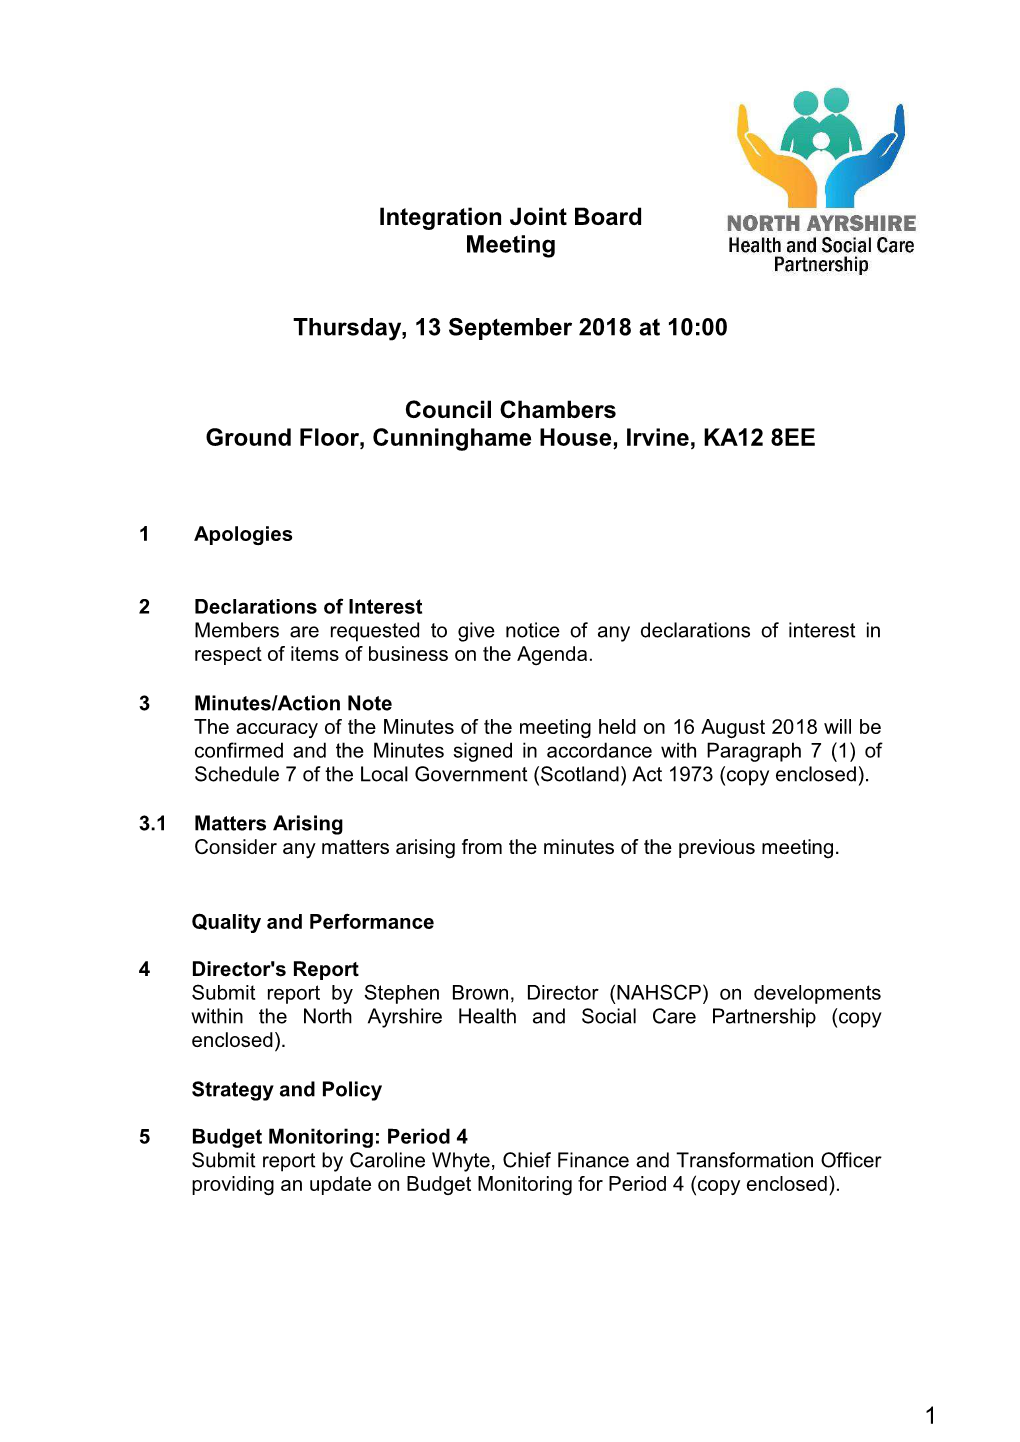 Integration Joint Board Meeting Thursday, 13 September 2018 at 10:00 Council Chambers Ground Floor, Cunninghame House, Irvine